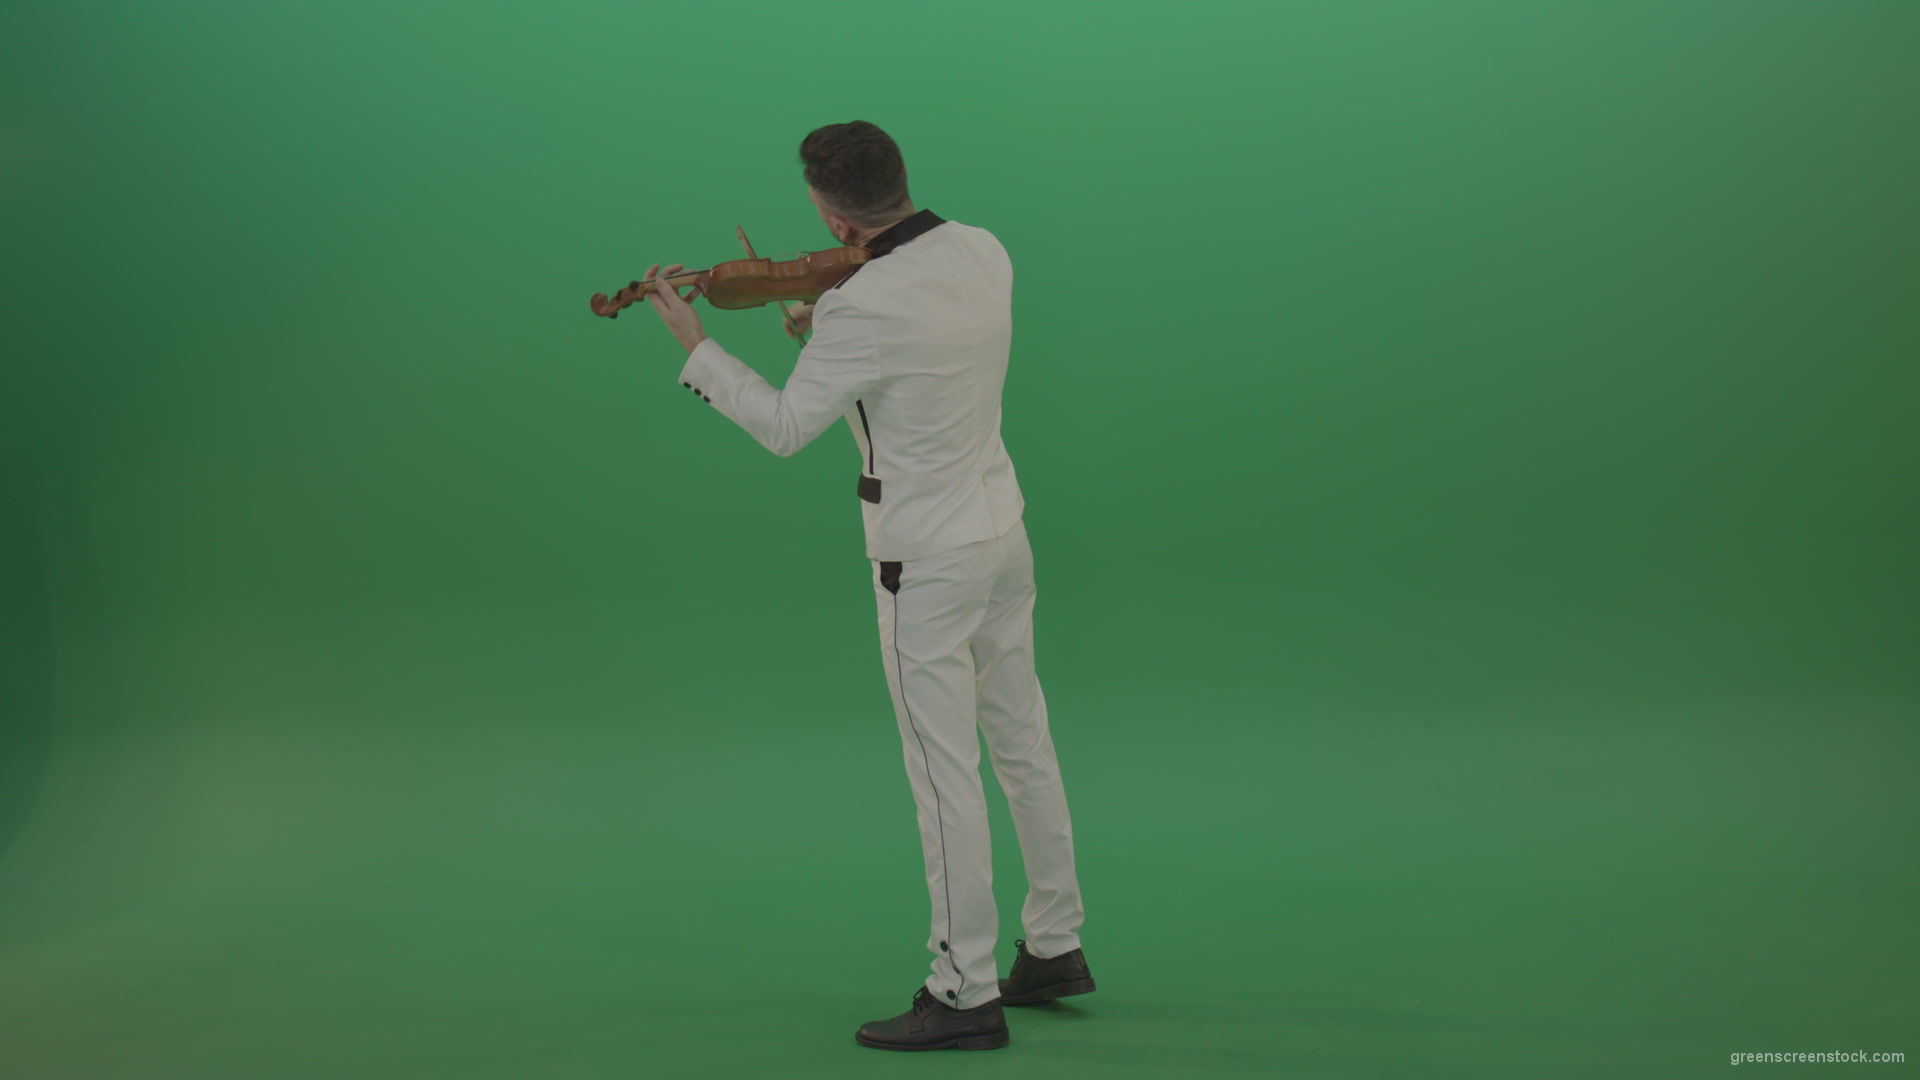 Full-size-Classic-orchestra-man-in-white-wear-play-violin-strings-music-instrument-isolated-on-green-screen-back-side-view_004 Green Screen Stock